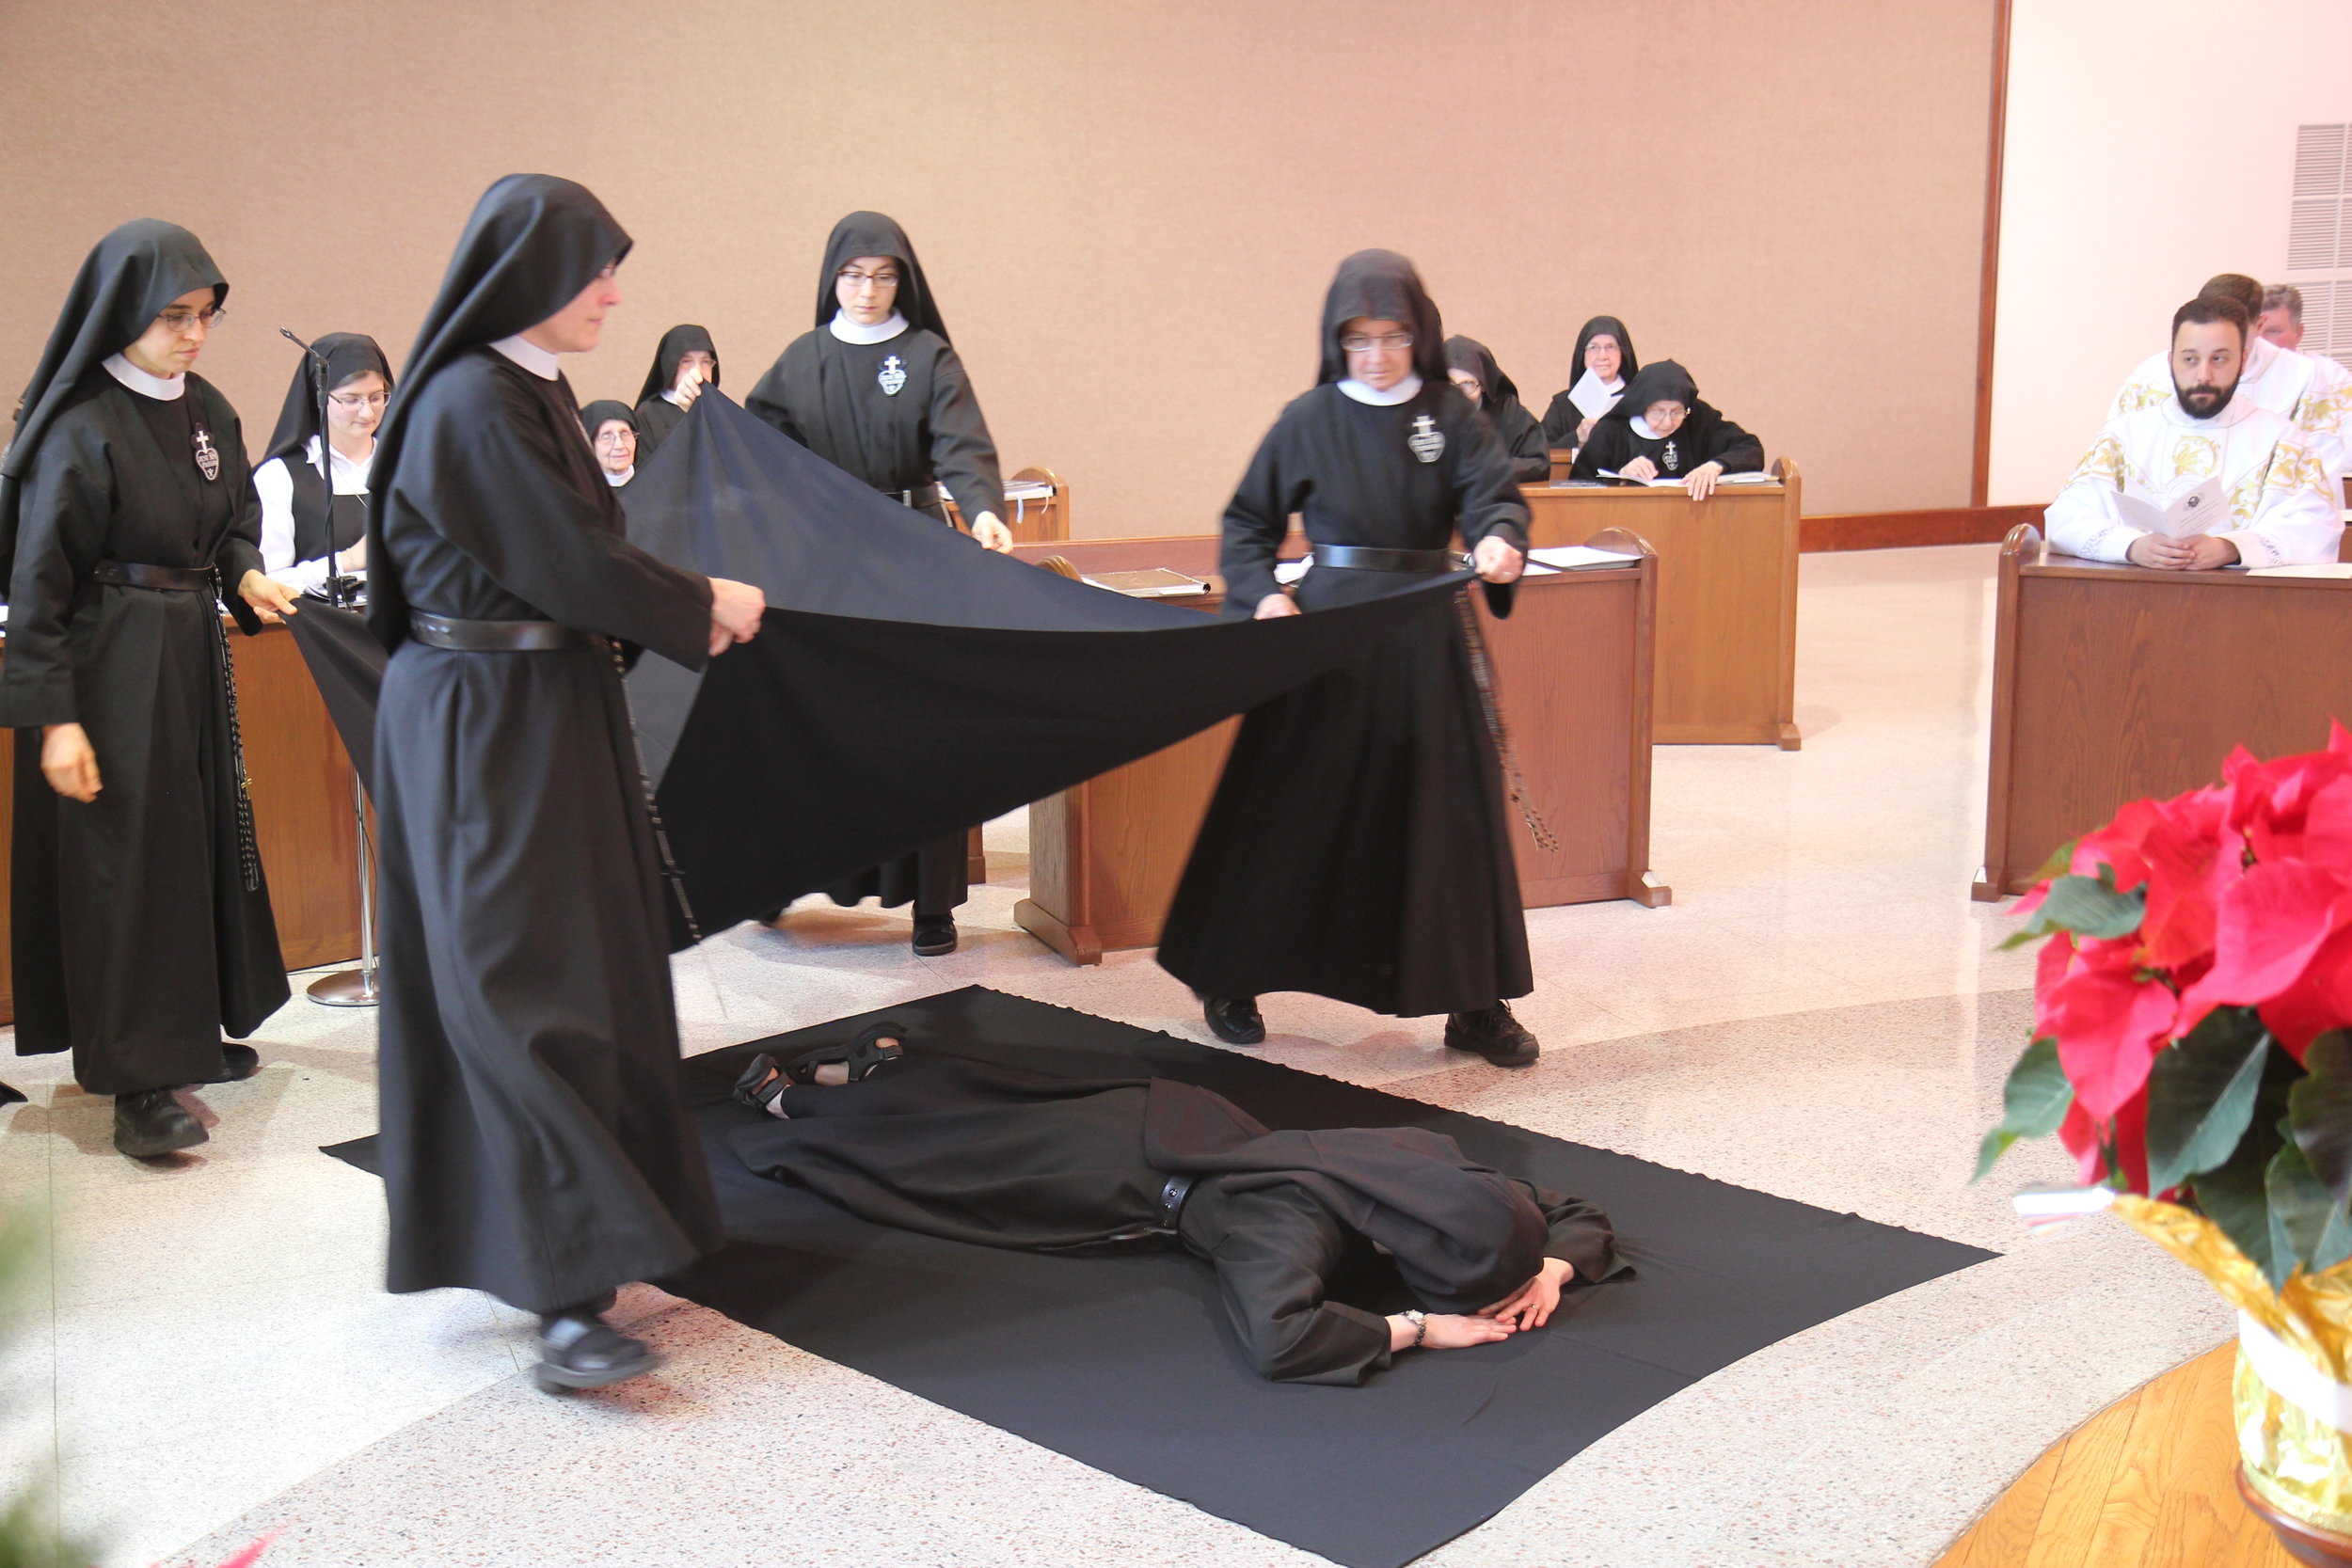  While she lies before the altar, the nuns and guests join in singing the Litany of the Saints, invoking their aid for Sister Cecilia Maria as she prepares for her perpetual consecration to Christ. 